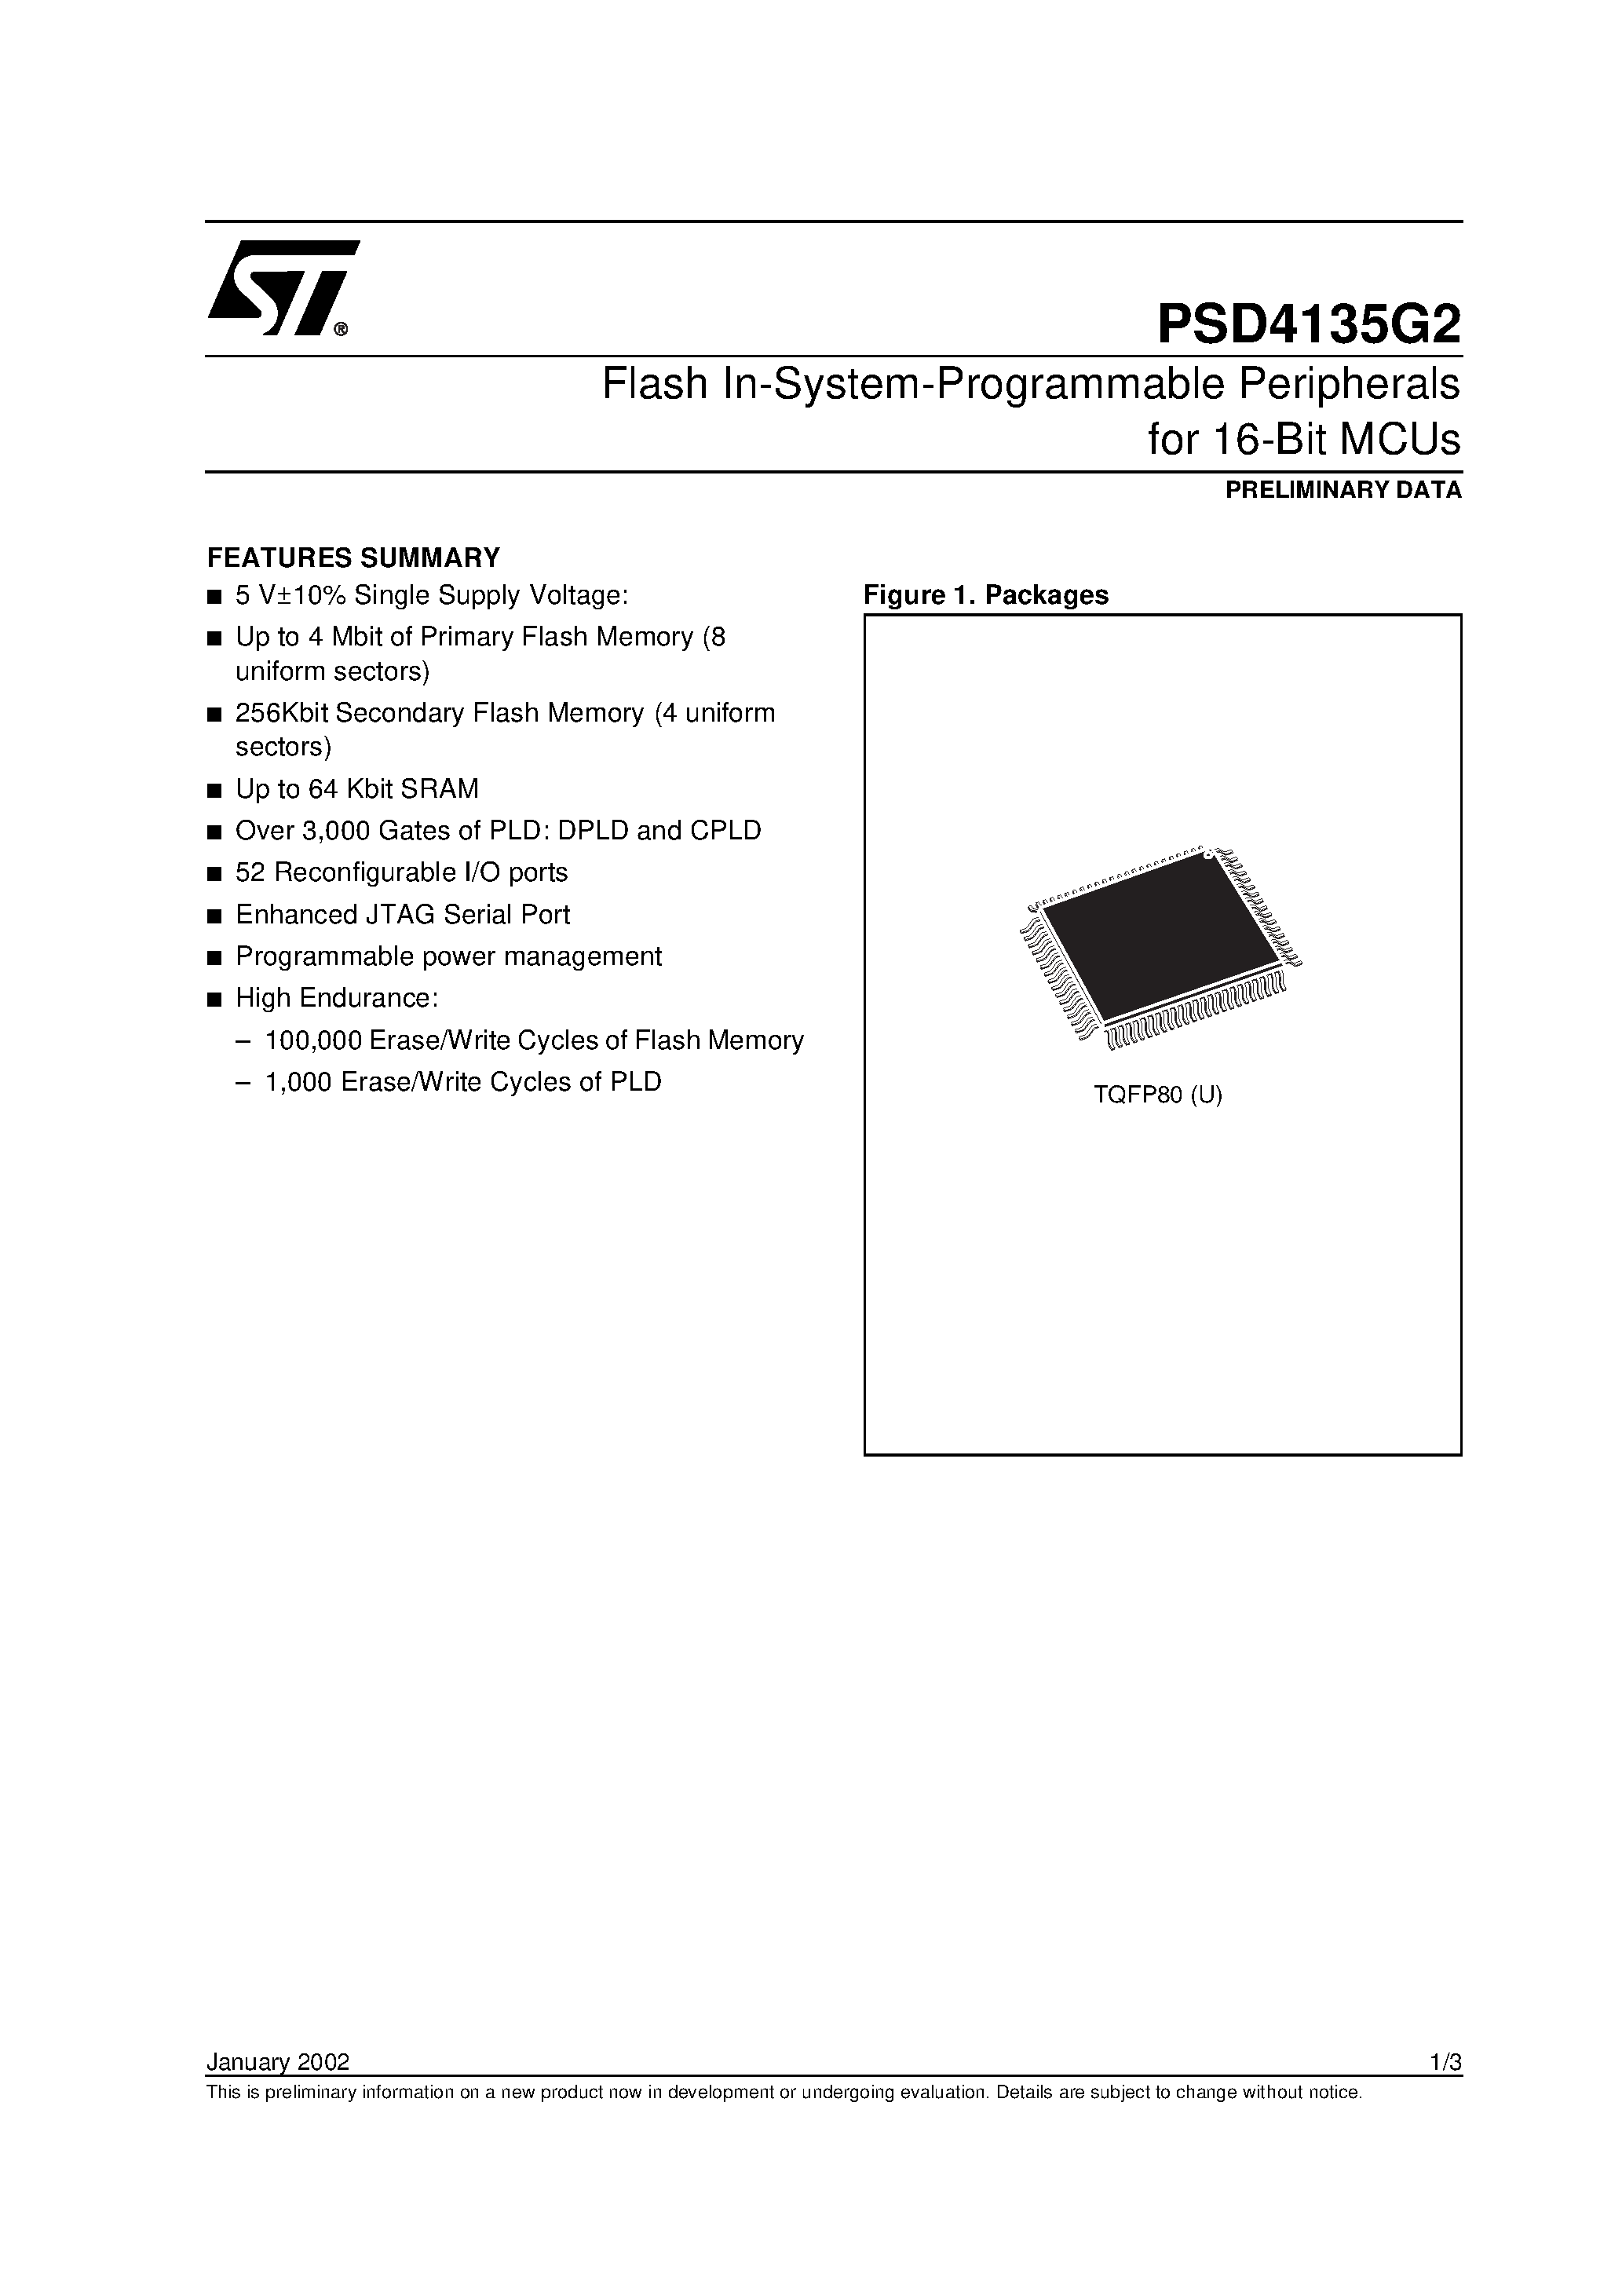 Даташит PSD4135F1-B-15JI - Flash In-System-Programmable Peripherals for 16-Bit MCUs страница 1